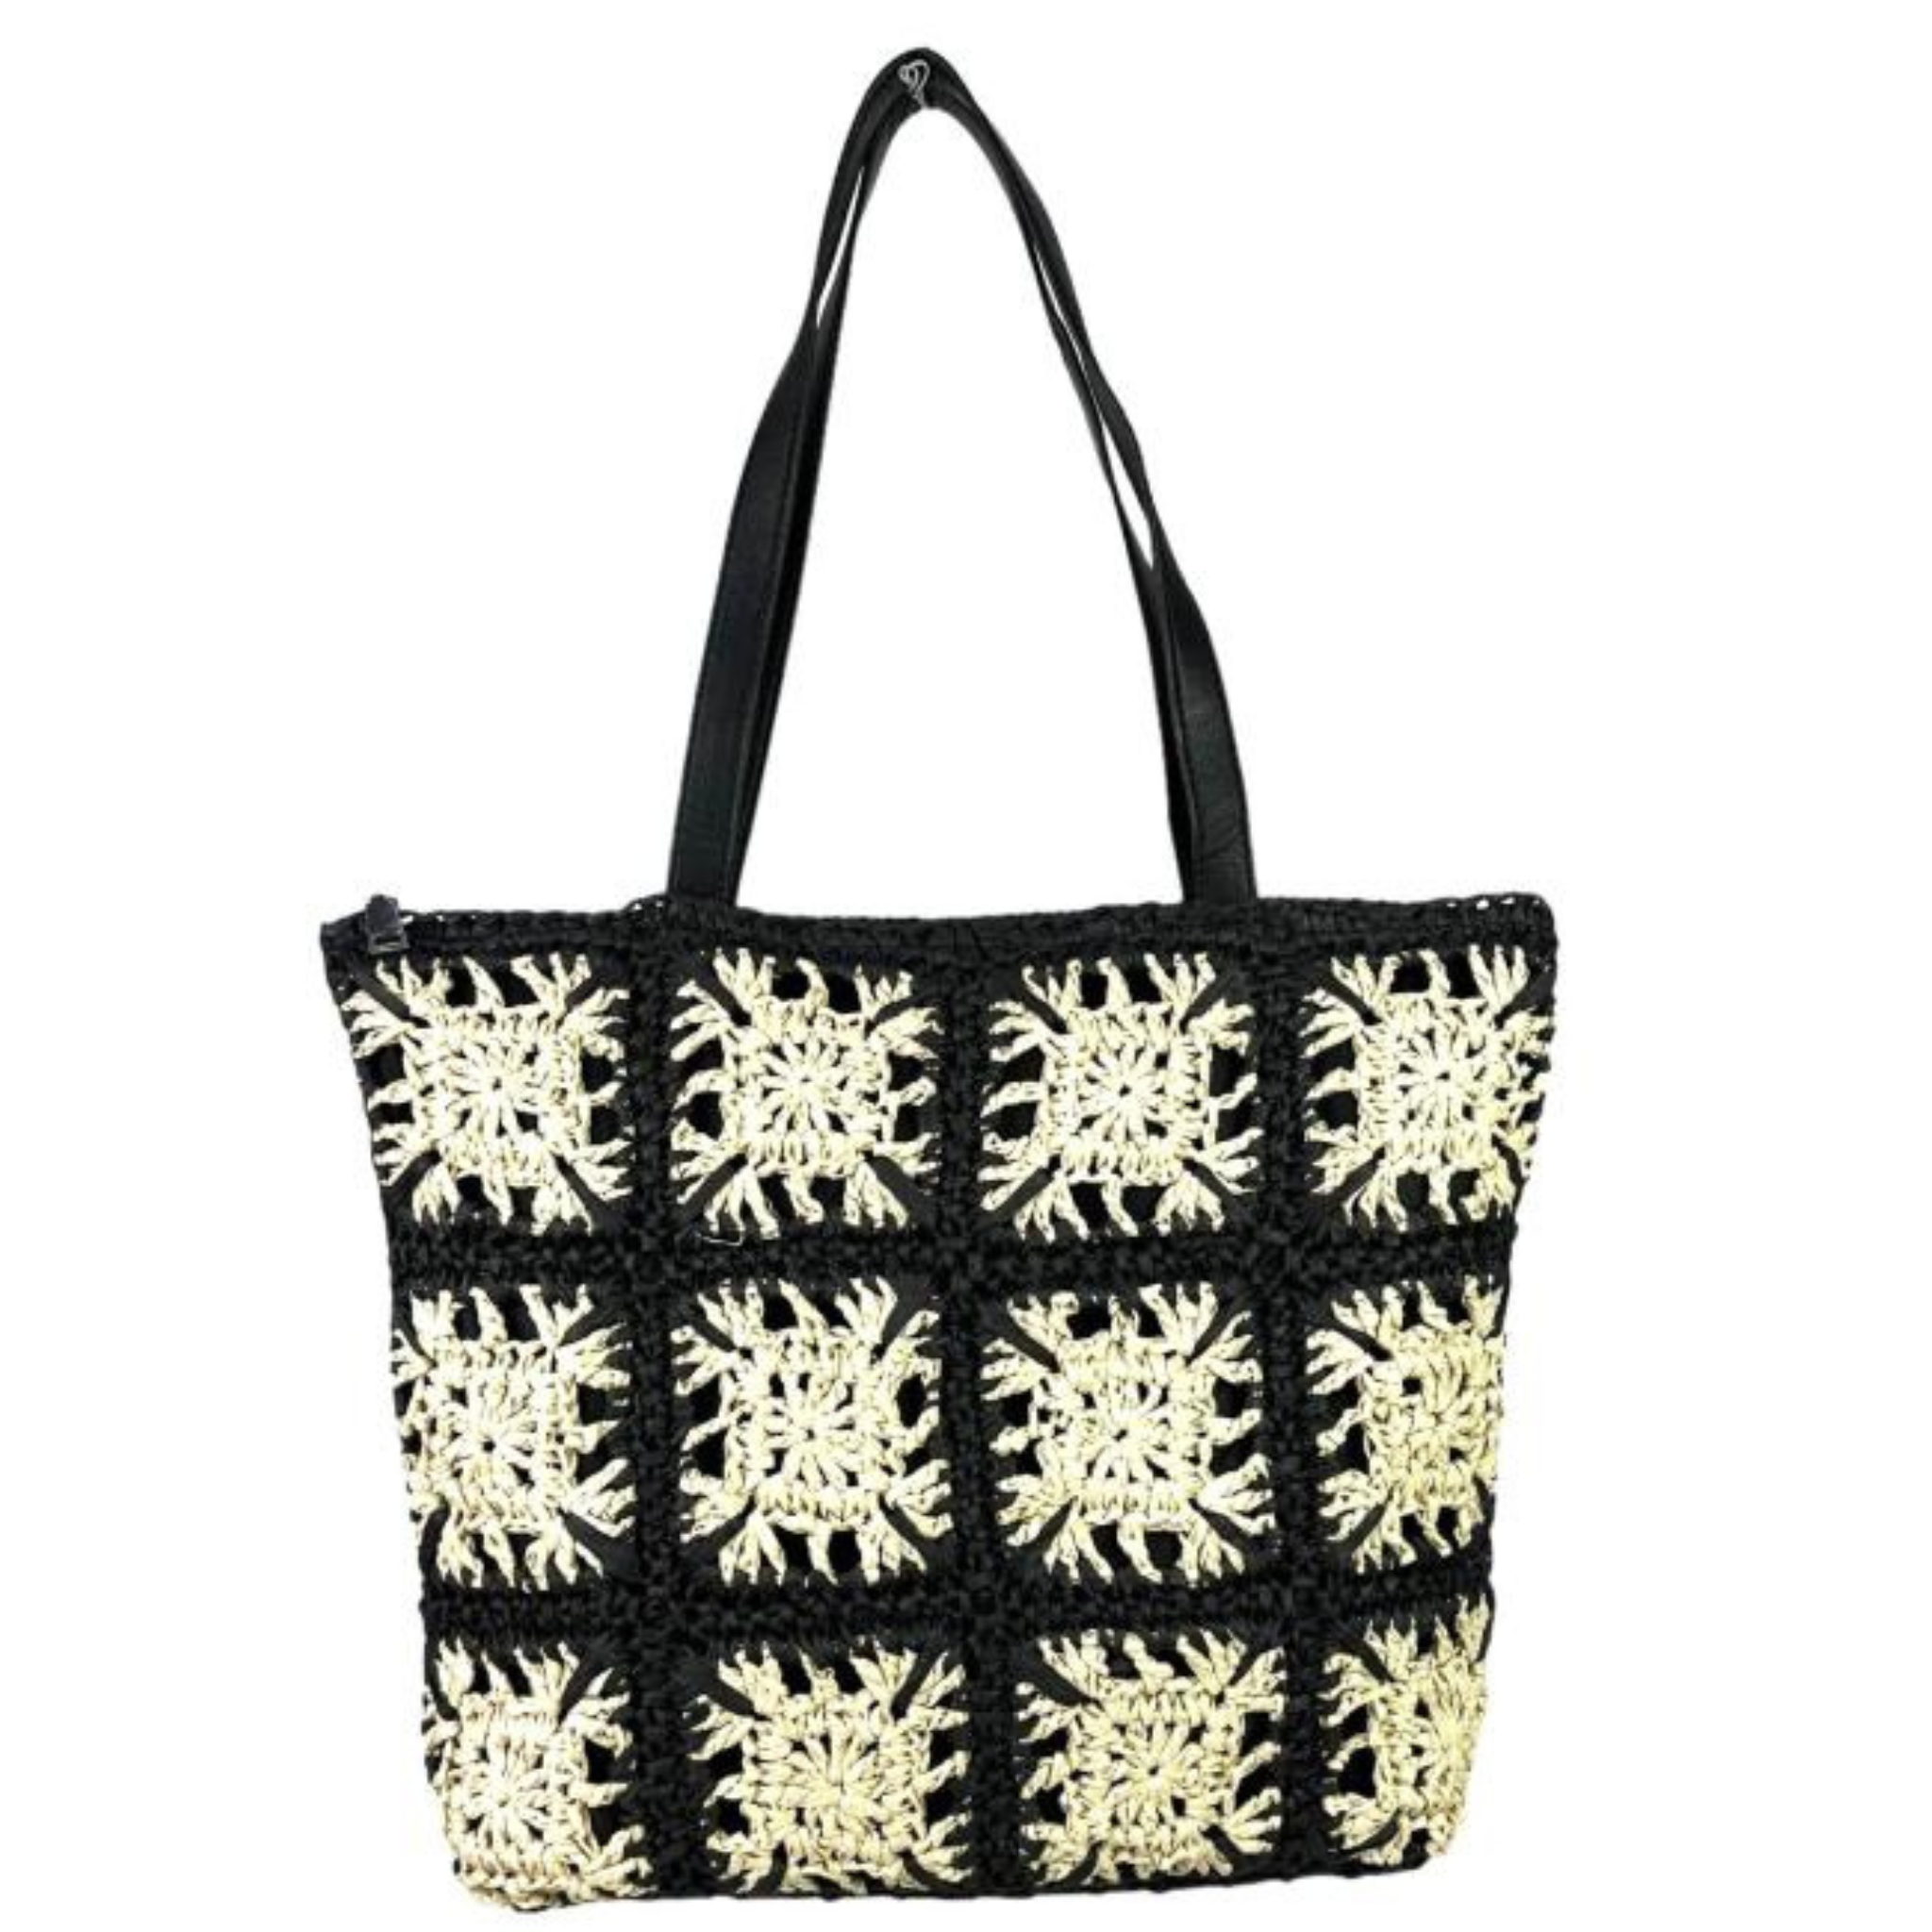 Tropical Straw Tote with Long Handles